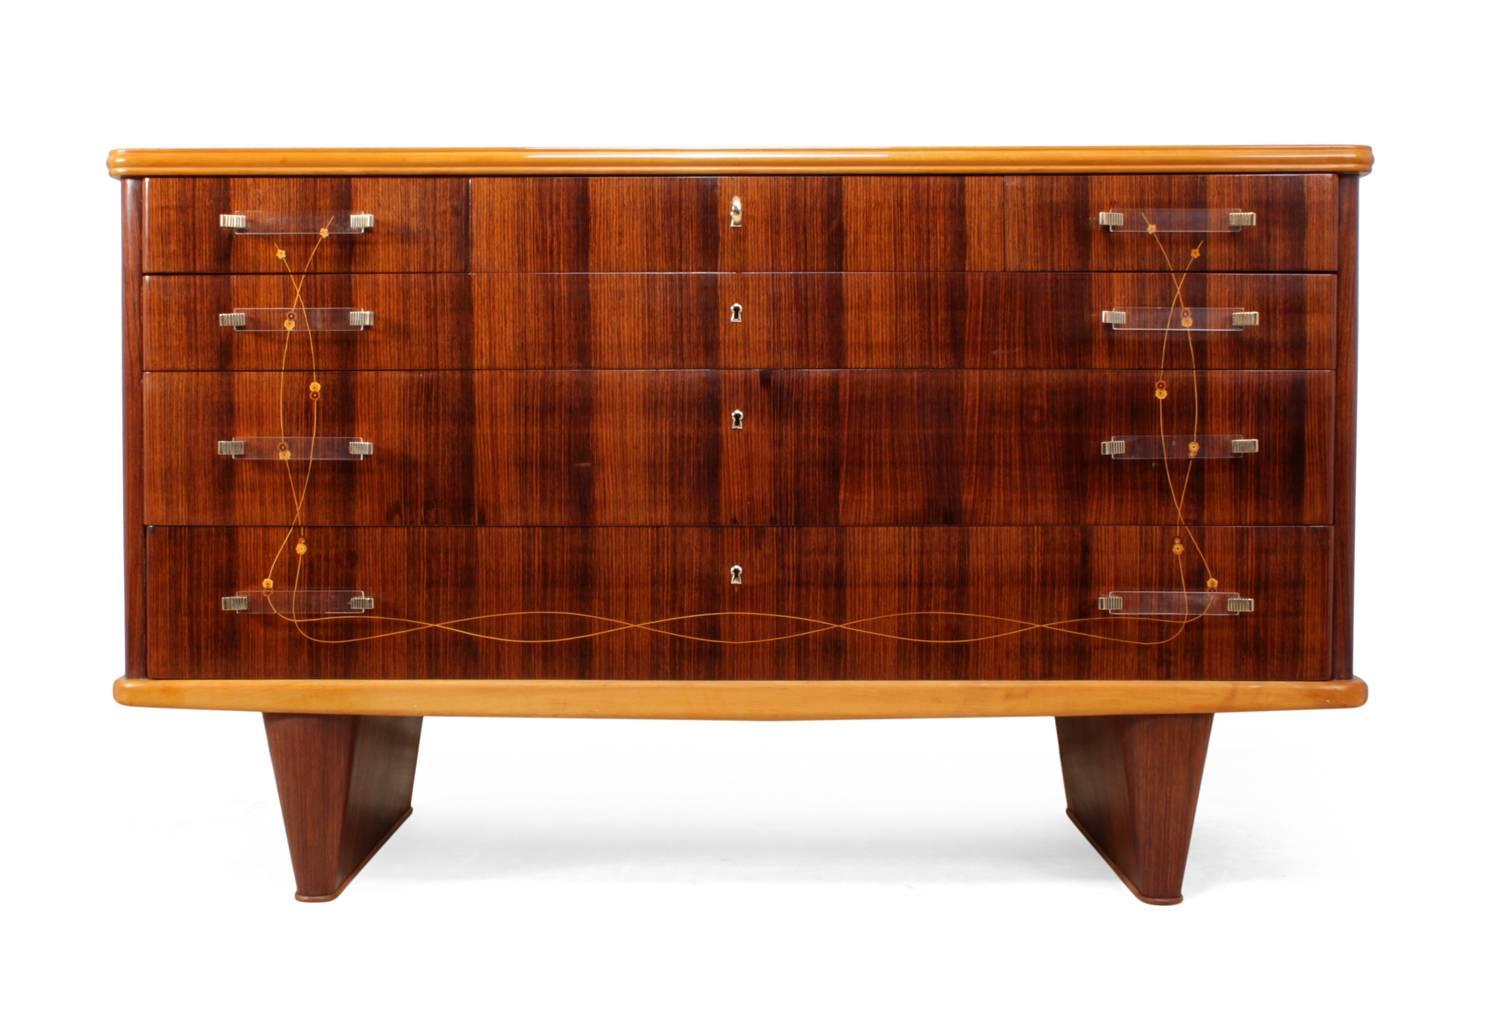 Italian rosewood commode by Dassi
Produced in Italy in the 1950s by Vittorio Dassi with his typical line-work with flowers inlay the chest has a black glass top, three long drawers and three short drawers above, four drawers are lockable with one